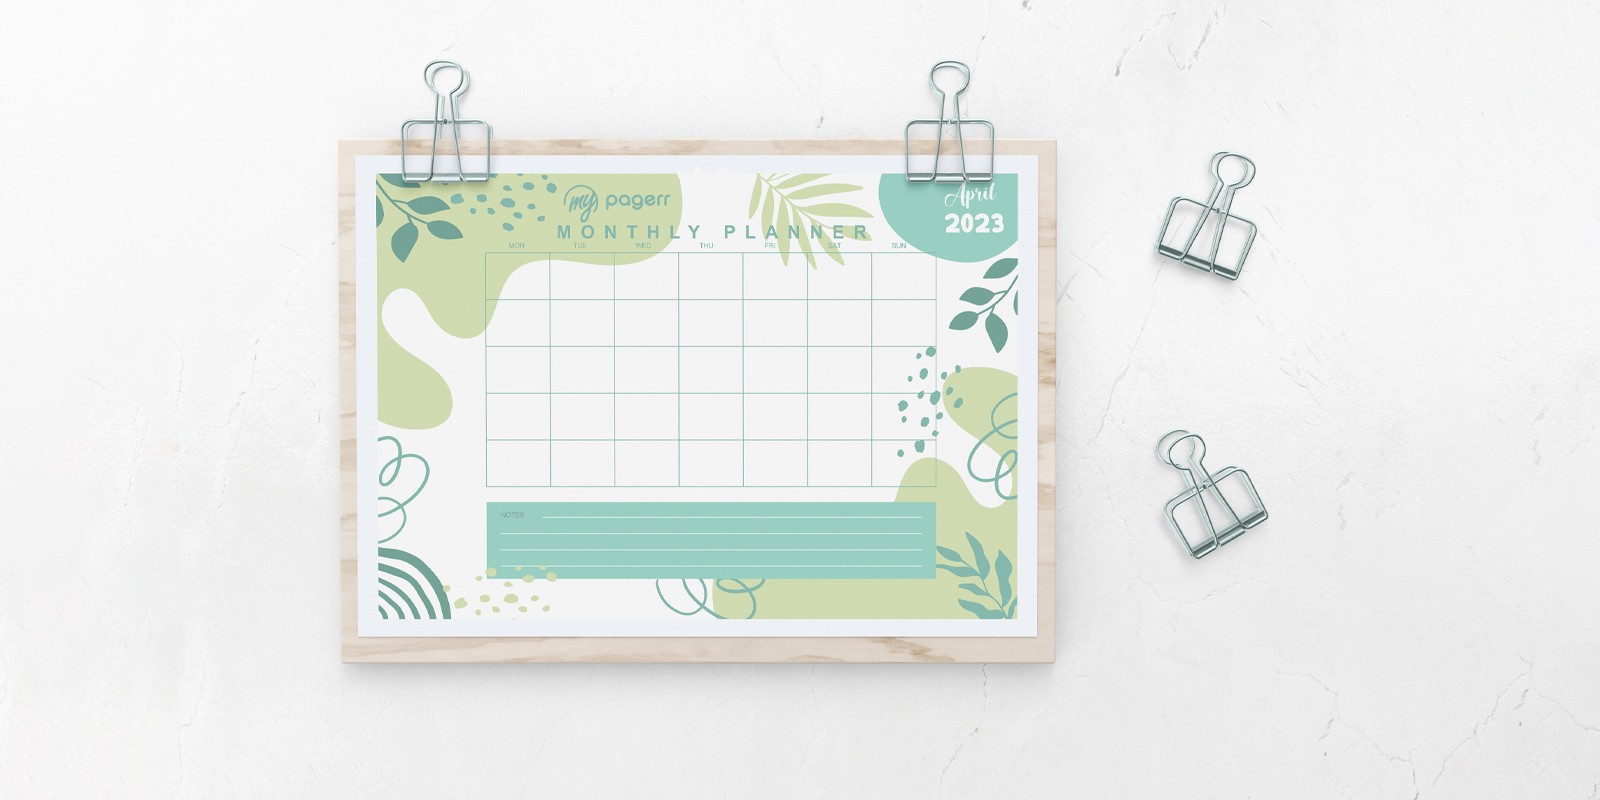 Calendar planners in Melbourne - Print with Pagerr